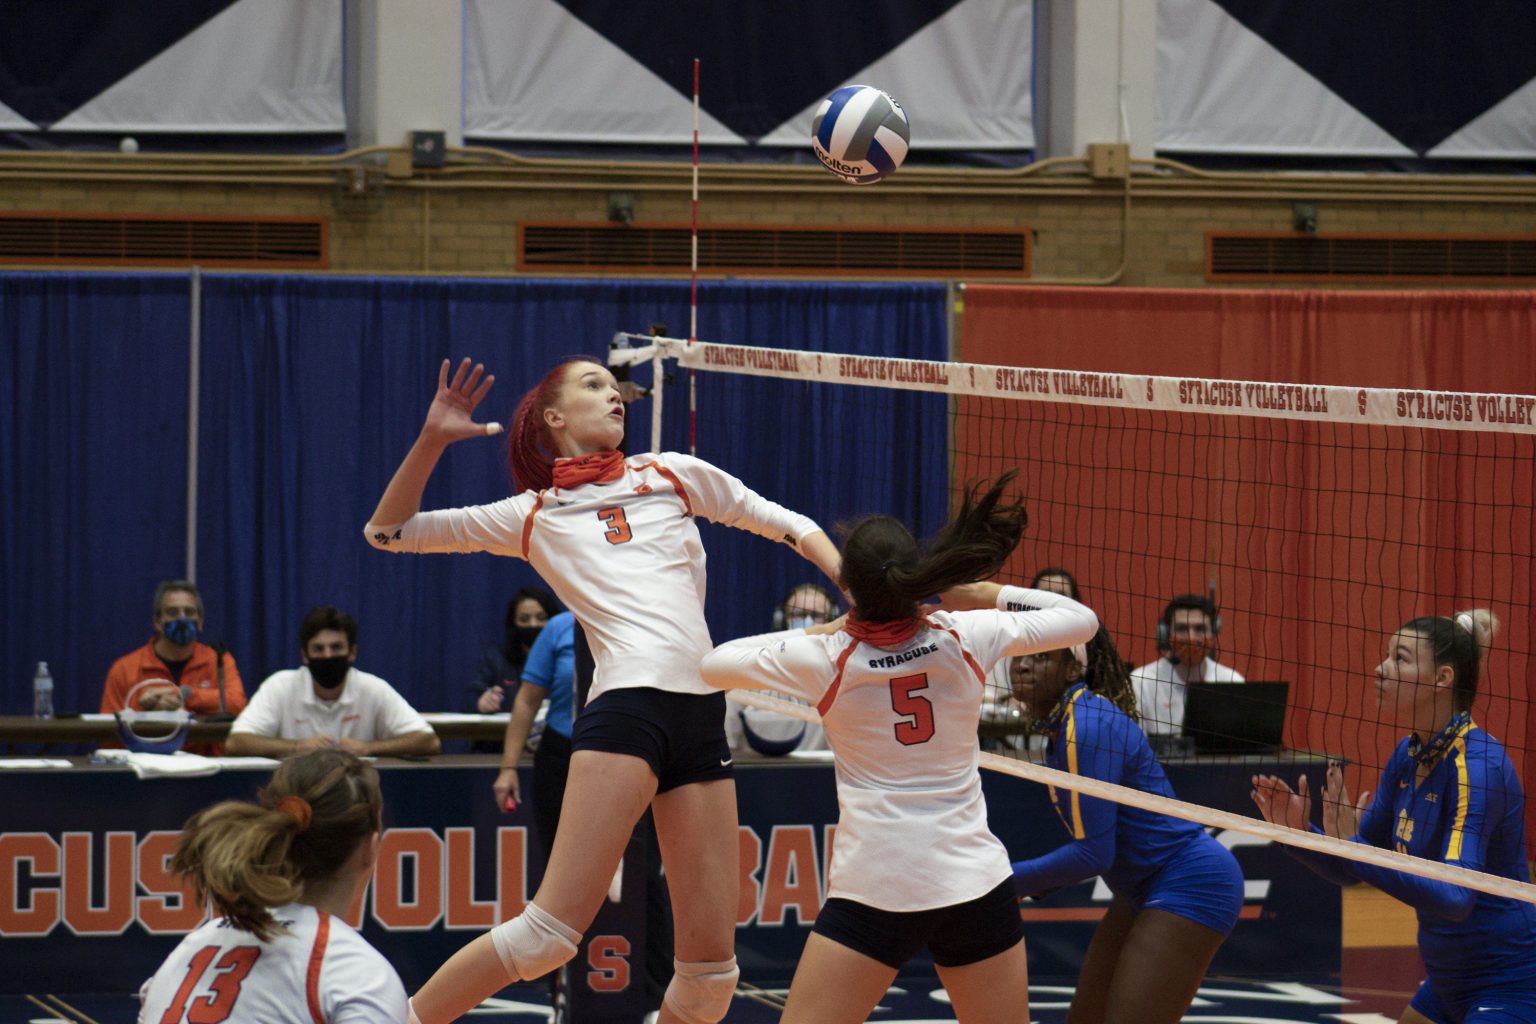 SU volleyball hangs onto national ranking despite two losses over weekend